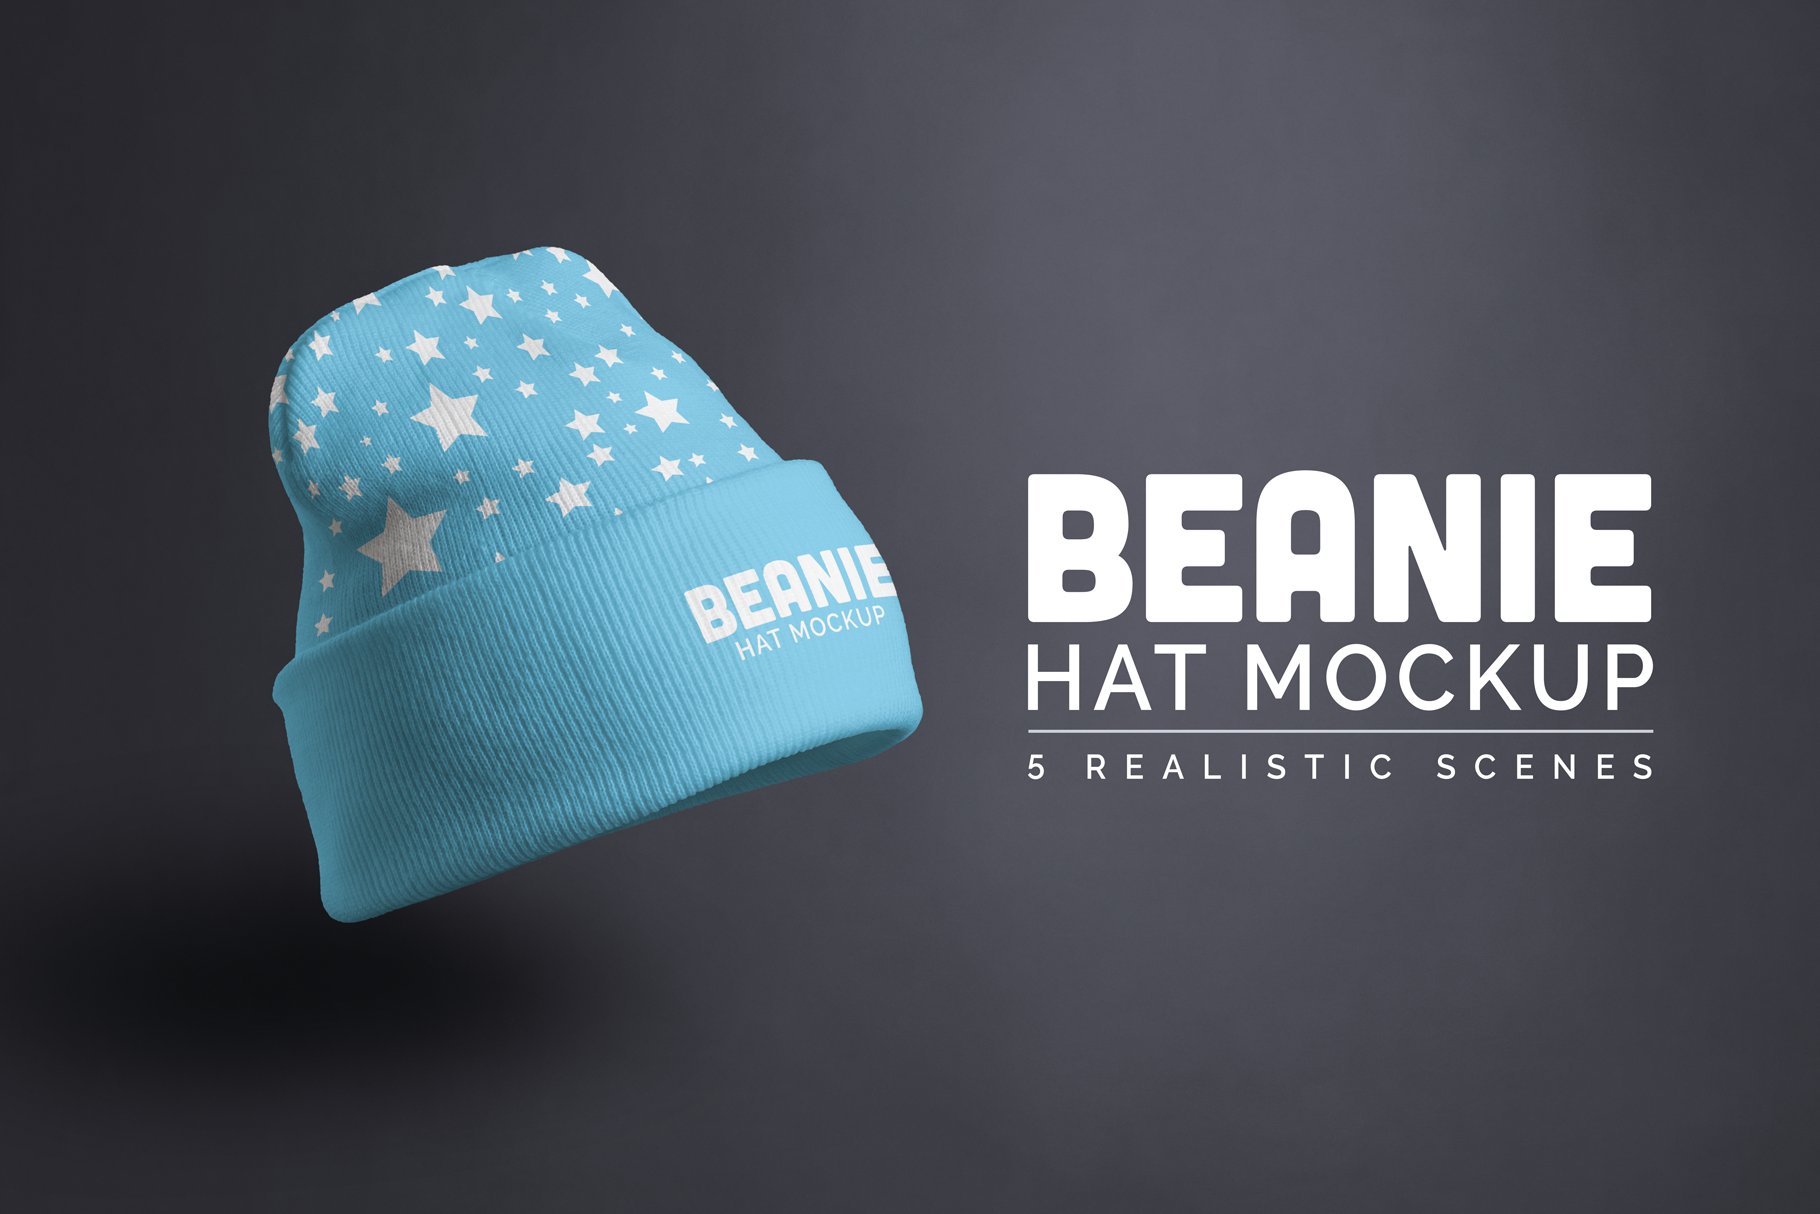 Beanie Hat Mock-up cover image.